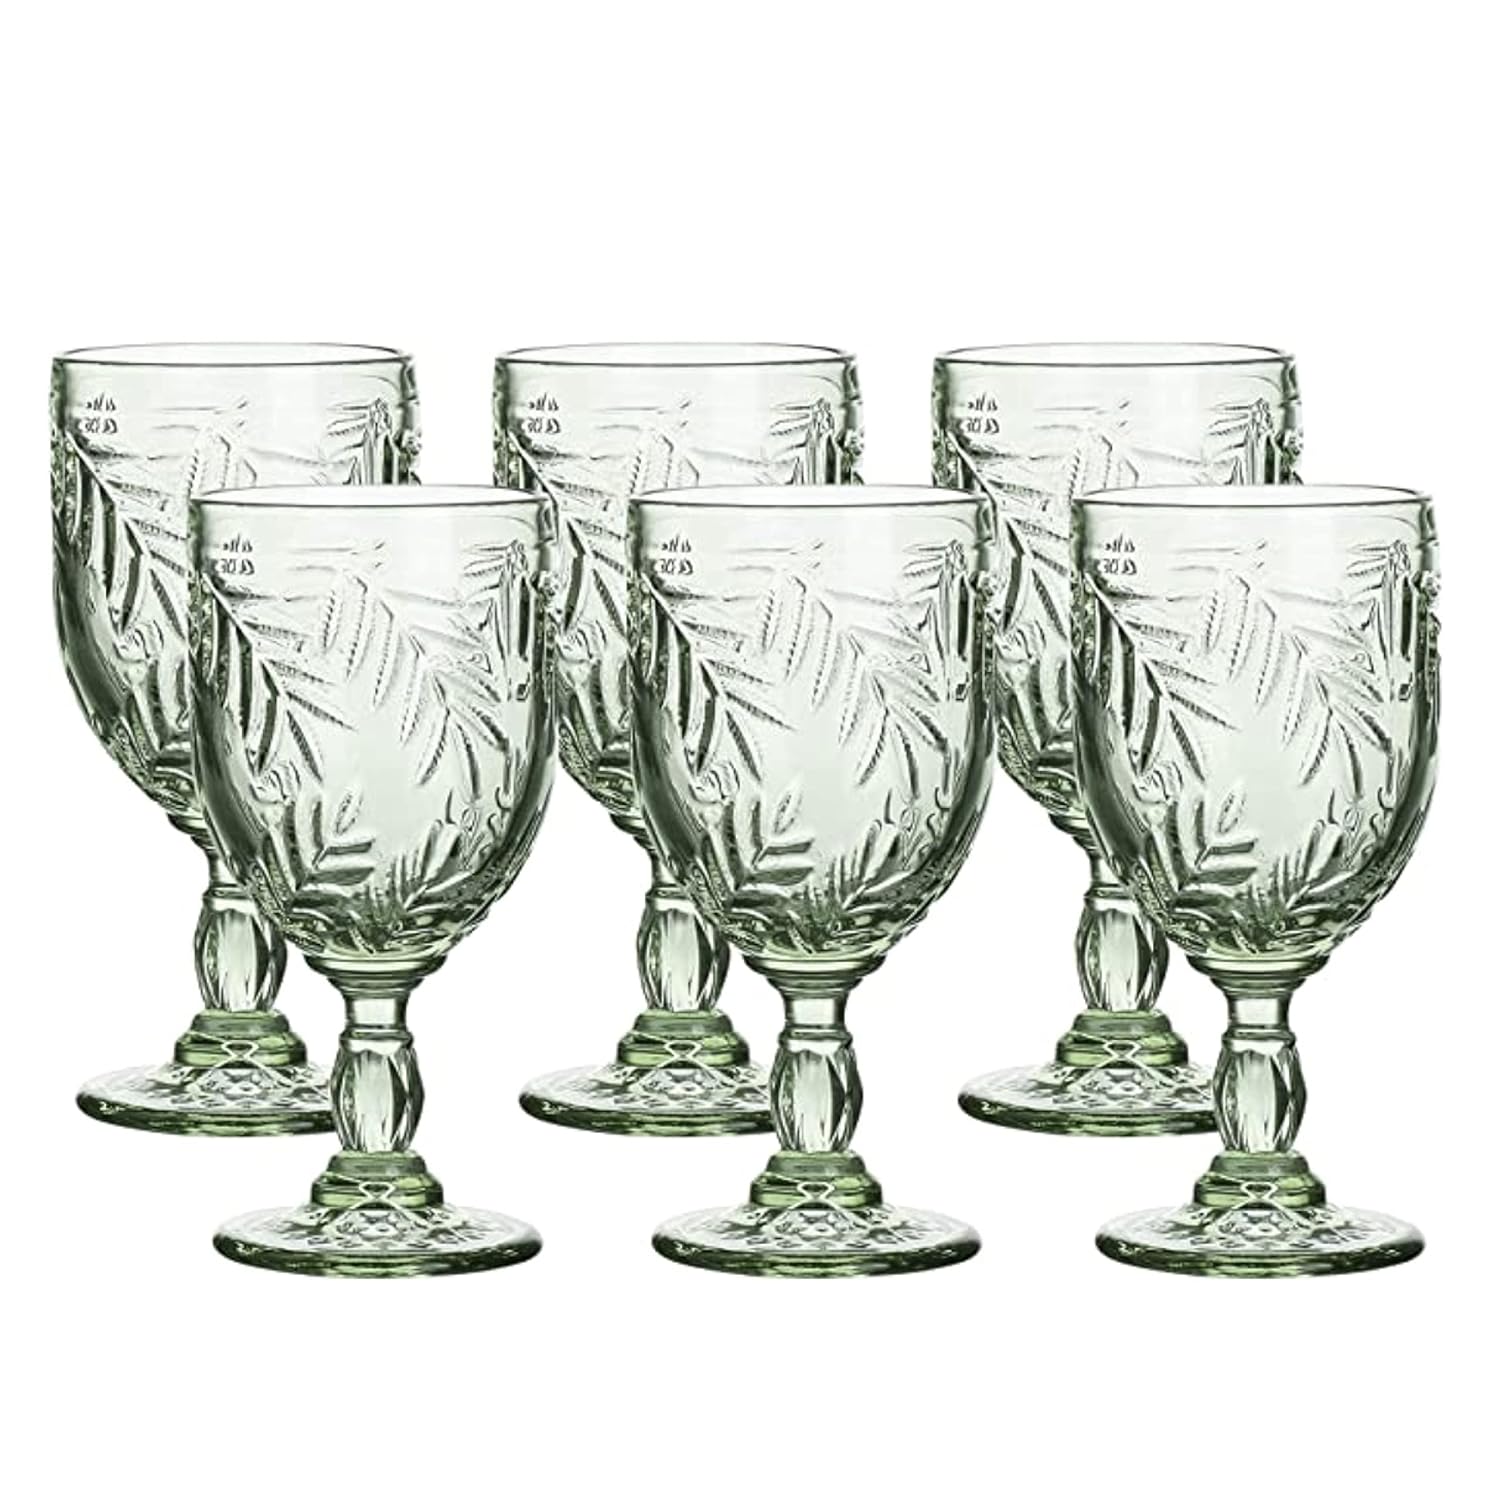 WHOLE HOUSEWARES | Coloured Green Vintage Wine Glass Goblet | 8.5 oz Embossed Design | Wedding, Party Glass Set of 6 (Green)